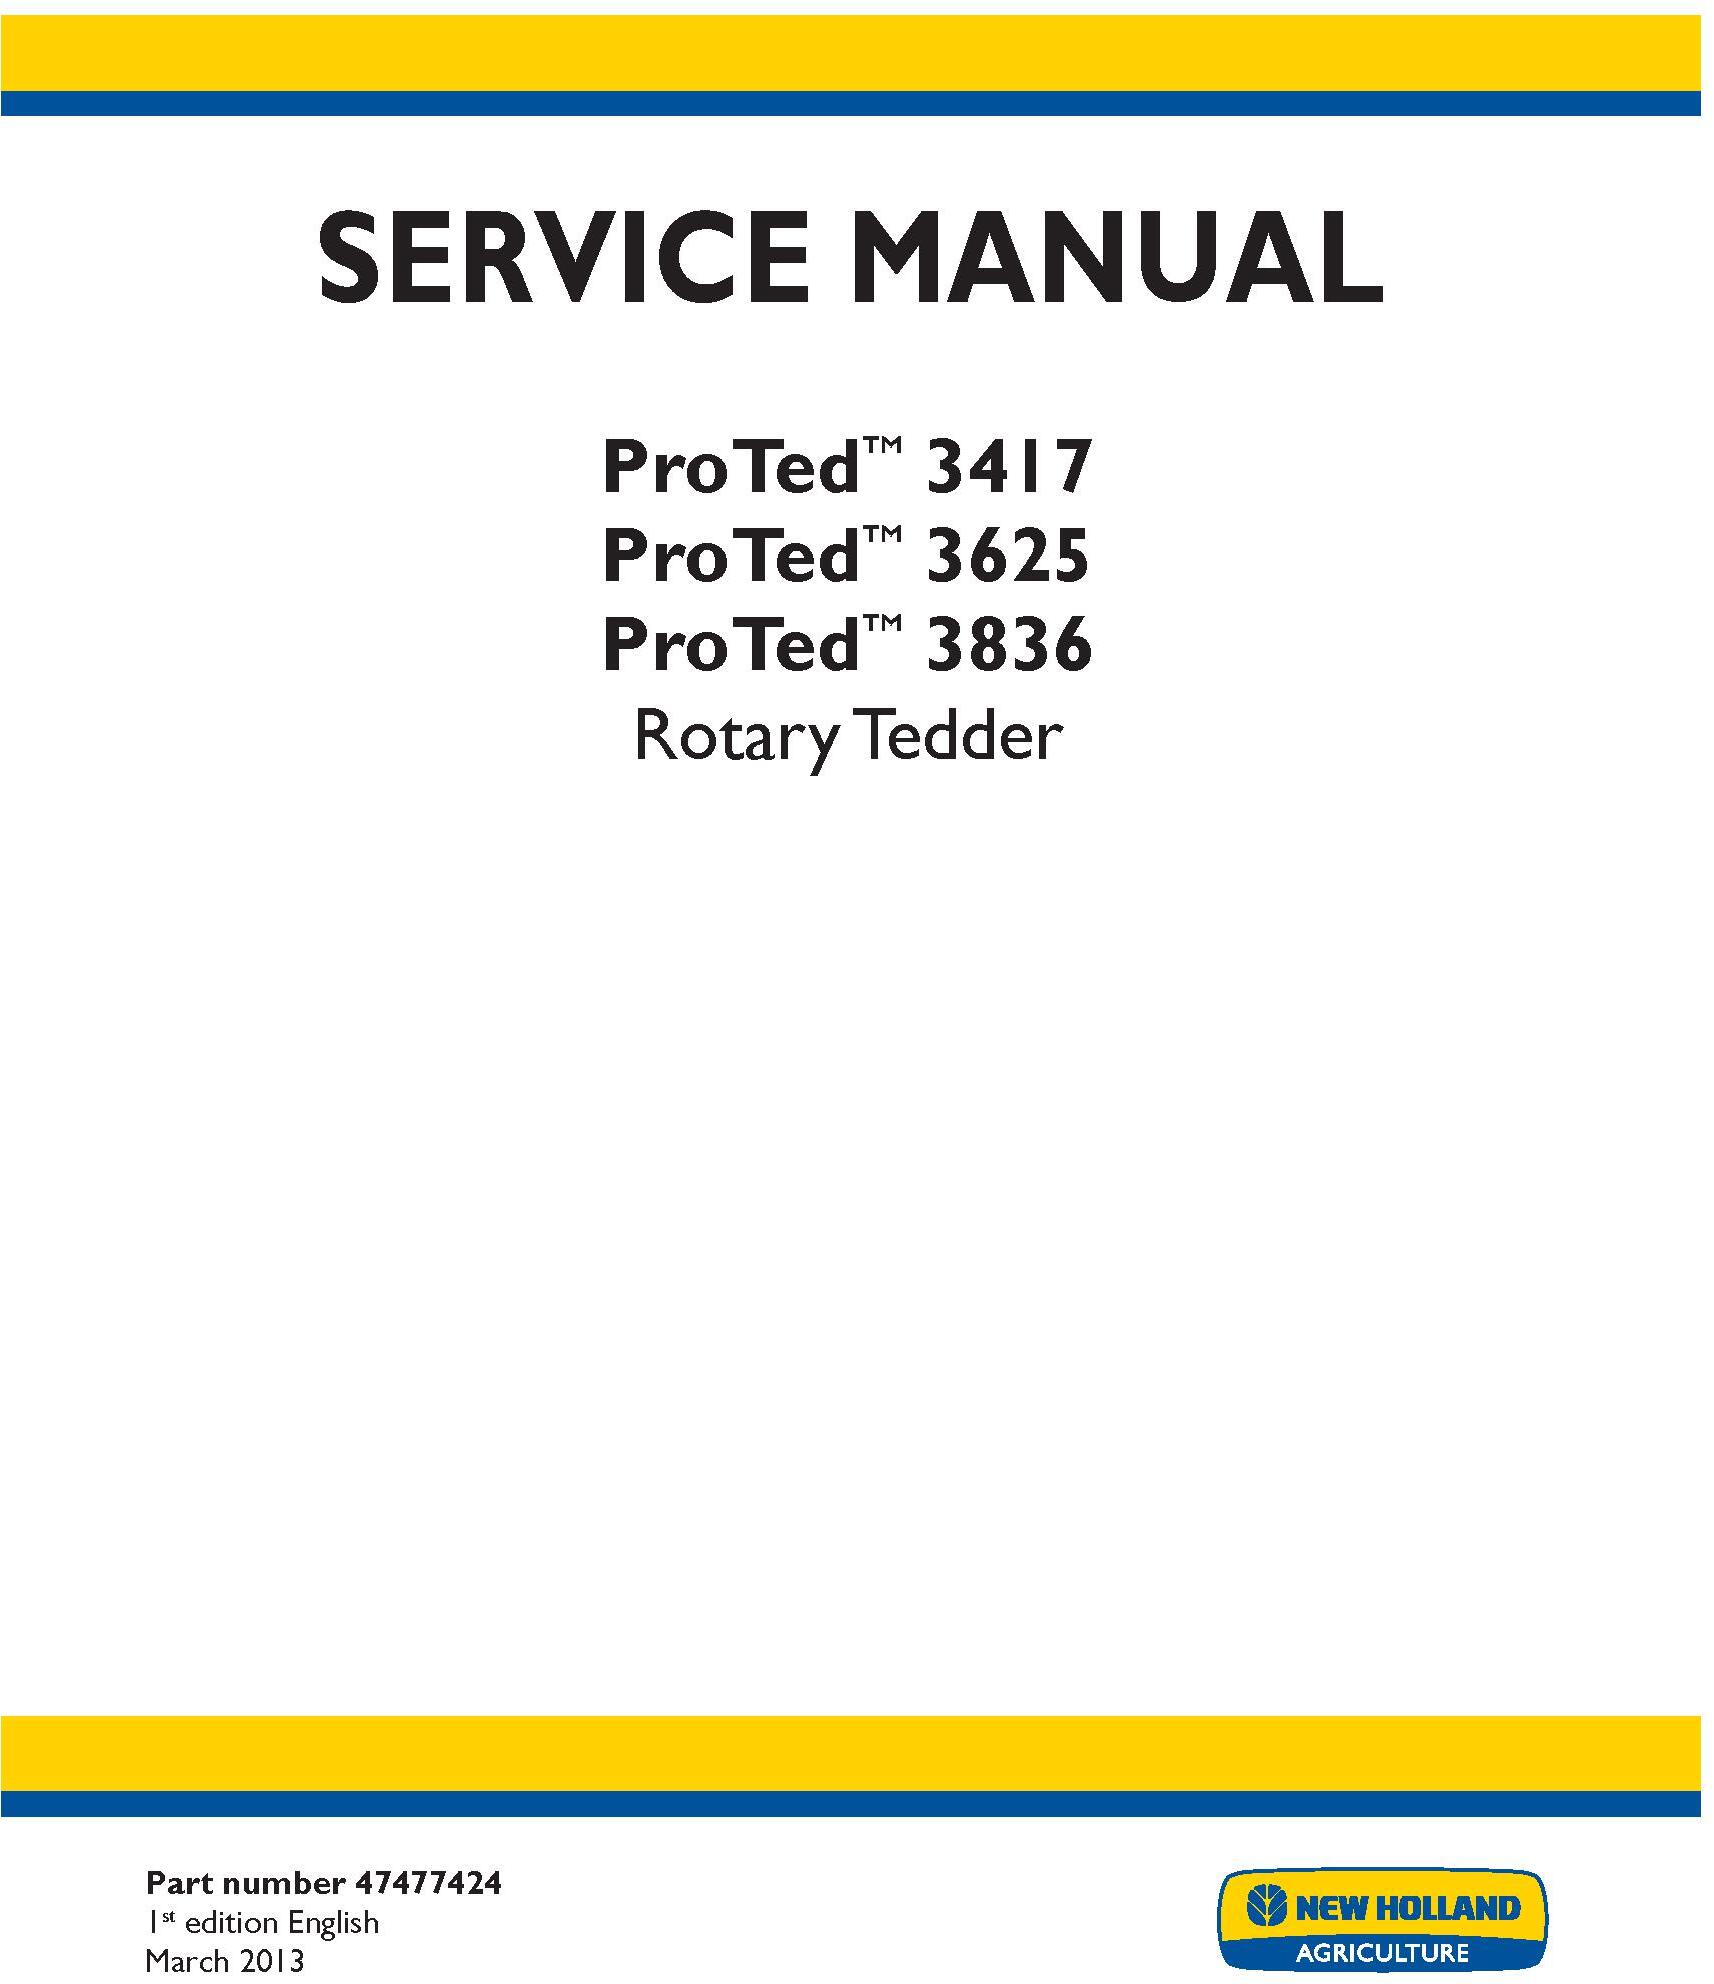 New Holland ProTed 3417, 3625, 3836 Rotary Tedder Service Manual